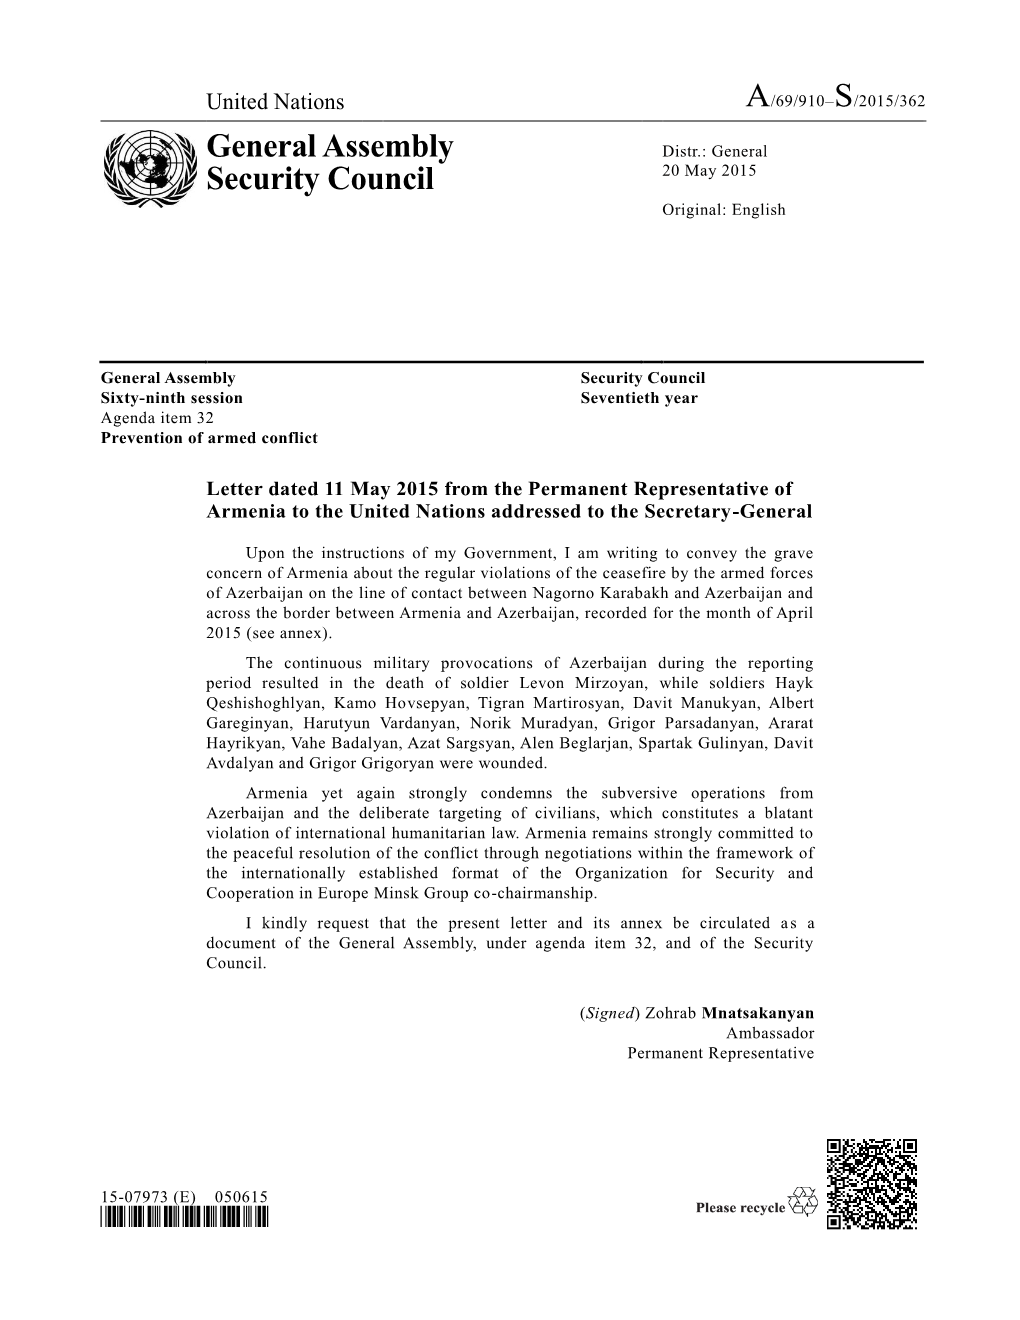 General Assembly Security Council Sixty-Ninth Session Seventieth Year Agenda Item 32 Prevention of Armed Conflict